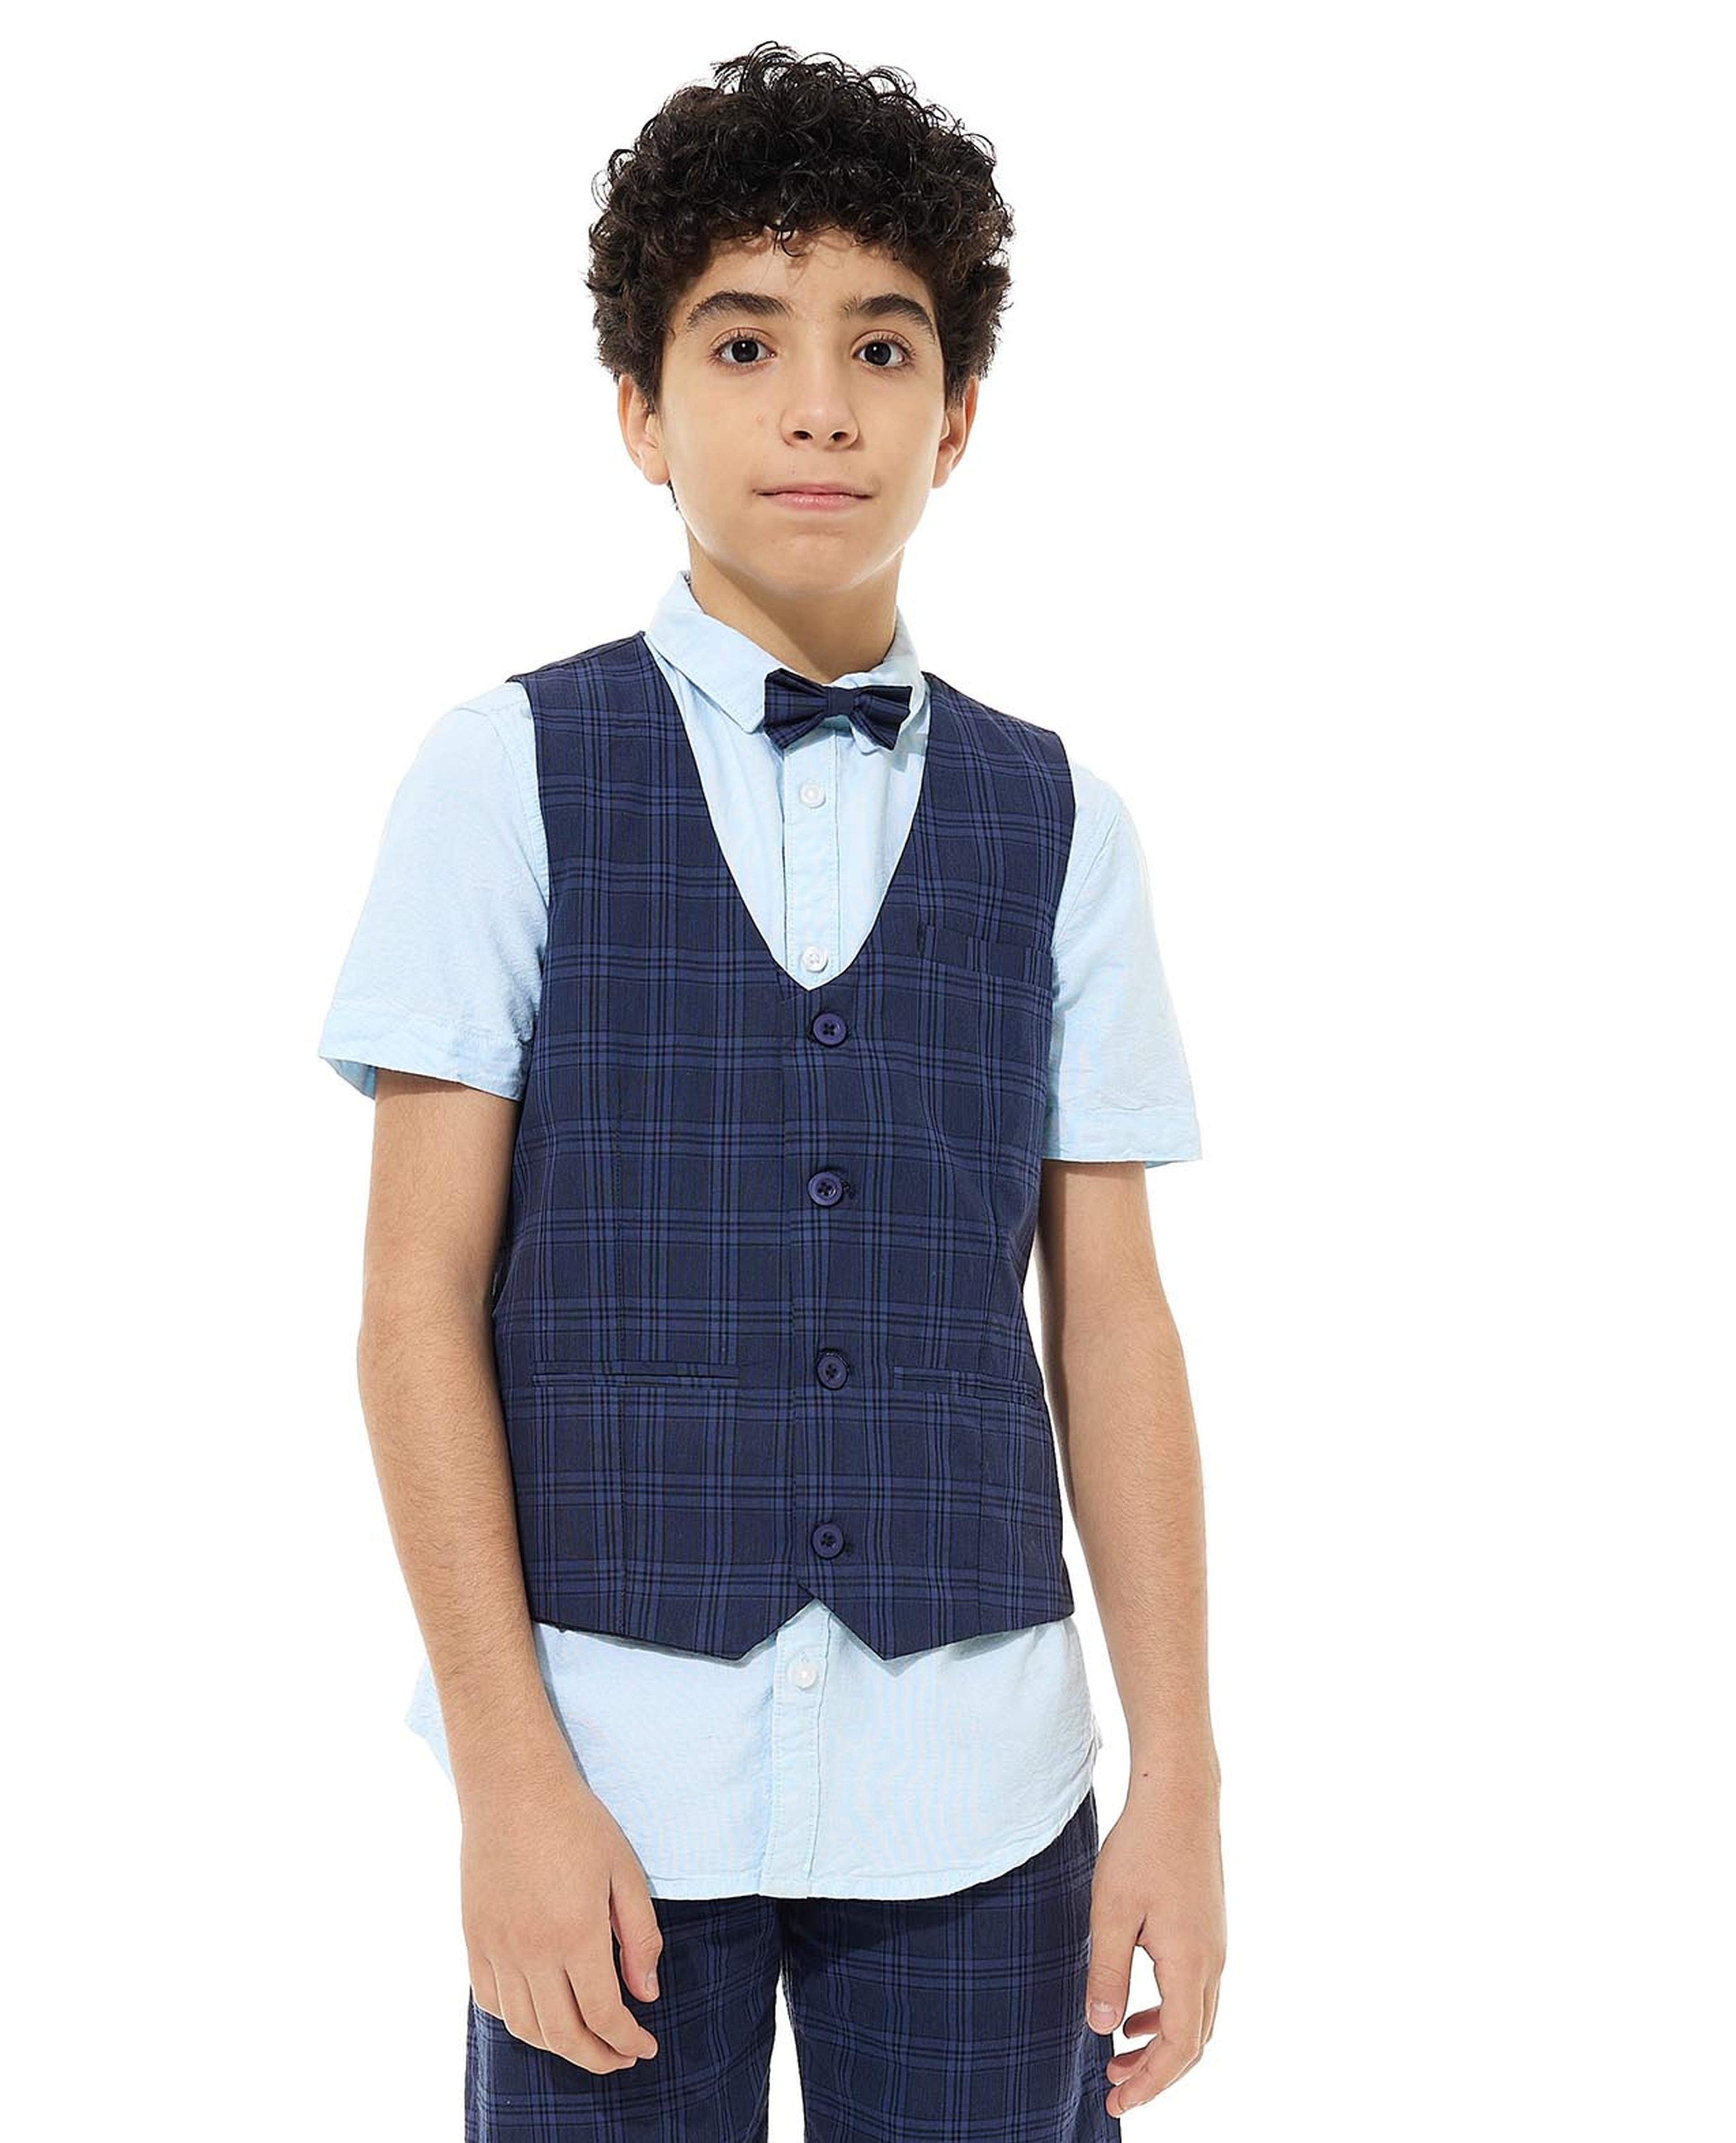 Checkered Shirt and Waistcoat with Bow Set